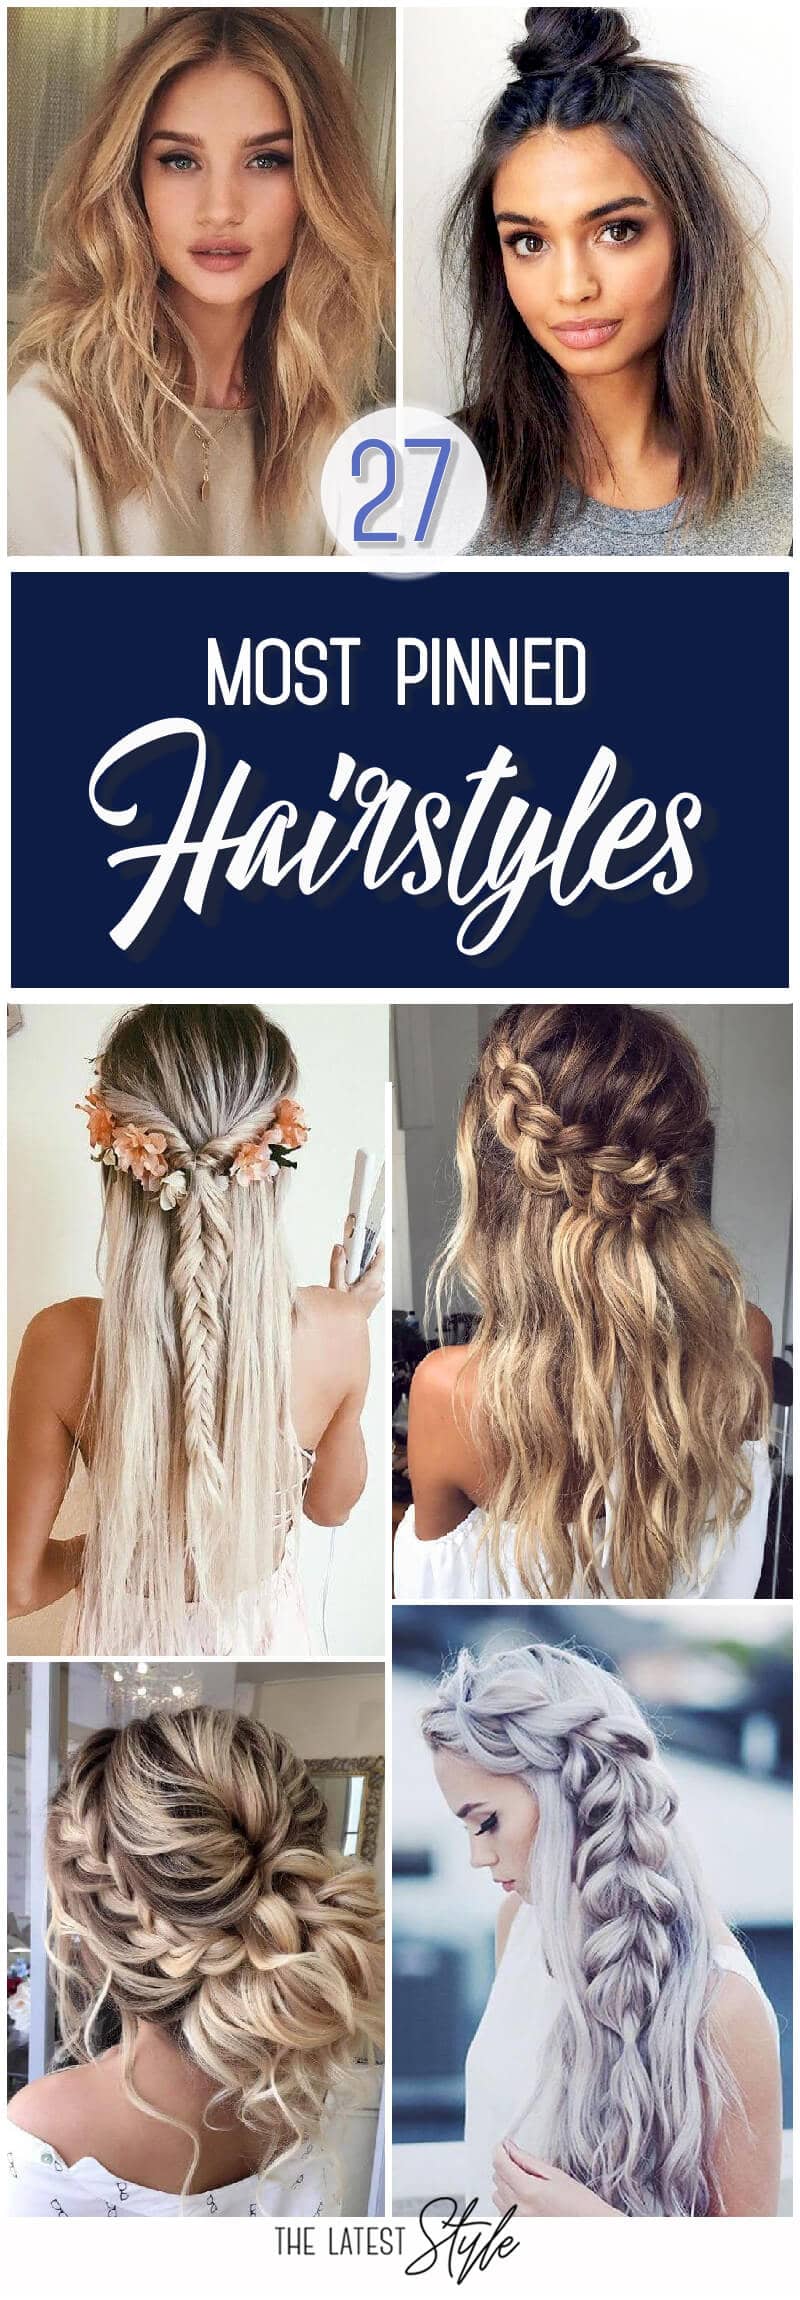 27 of the Most Pinned Hairstyles to Start The Year Right